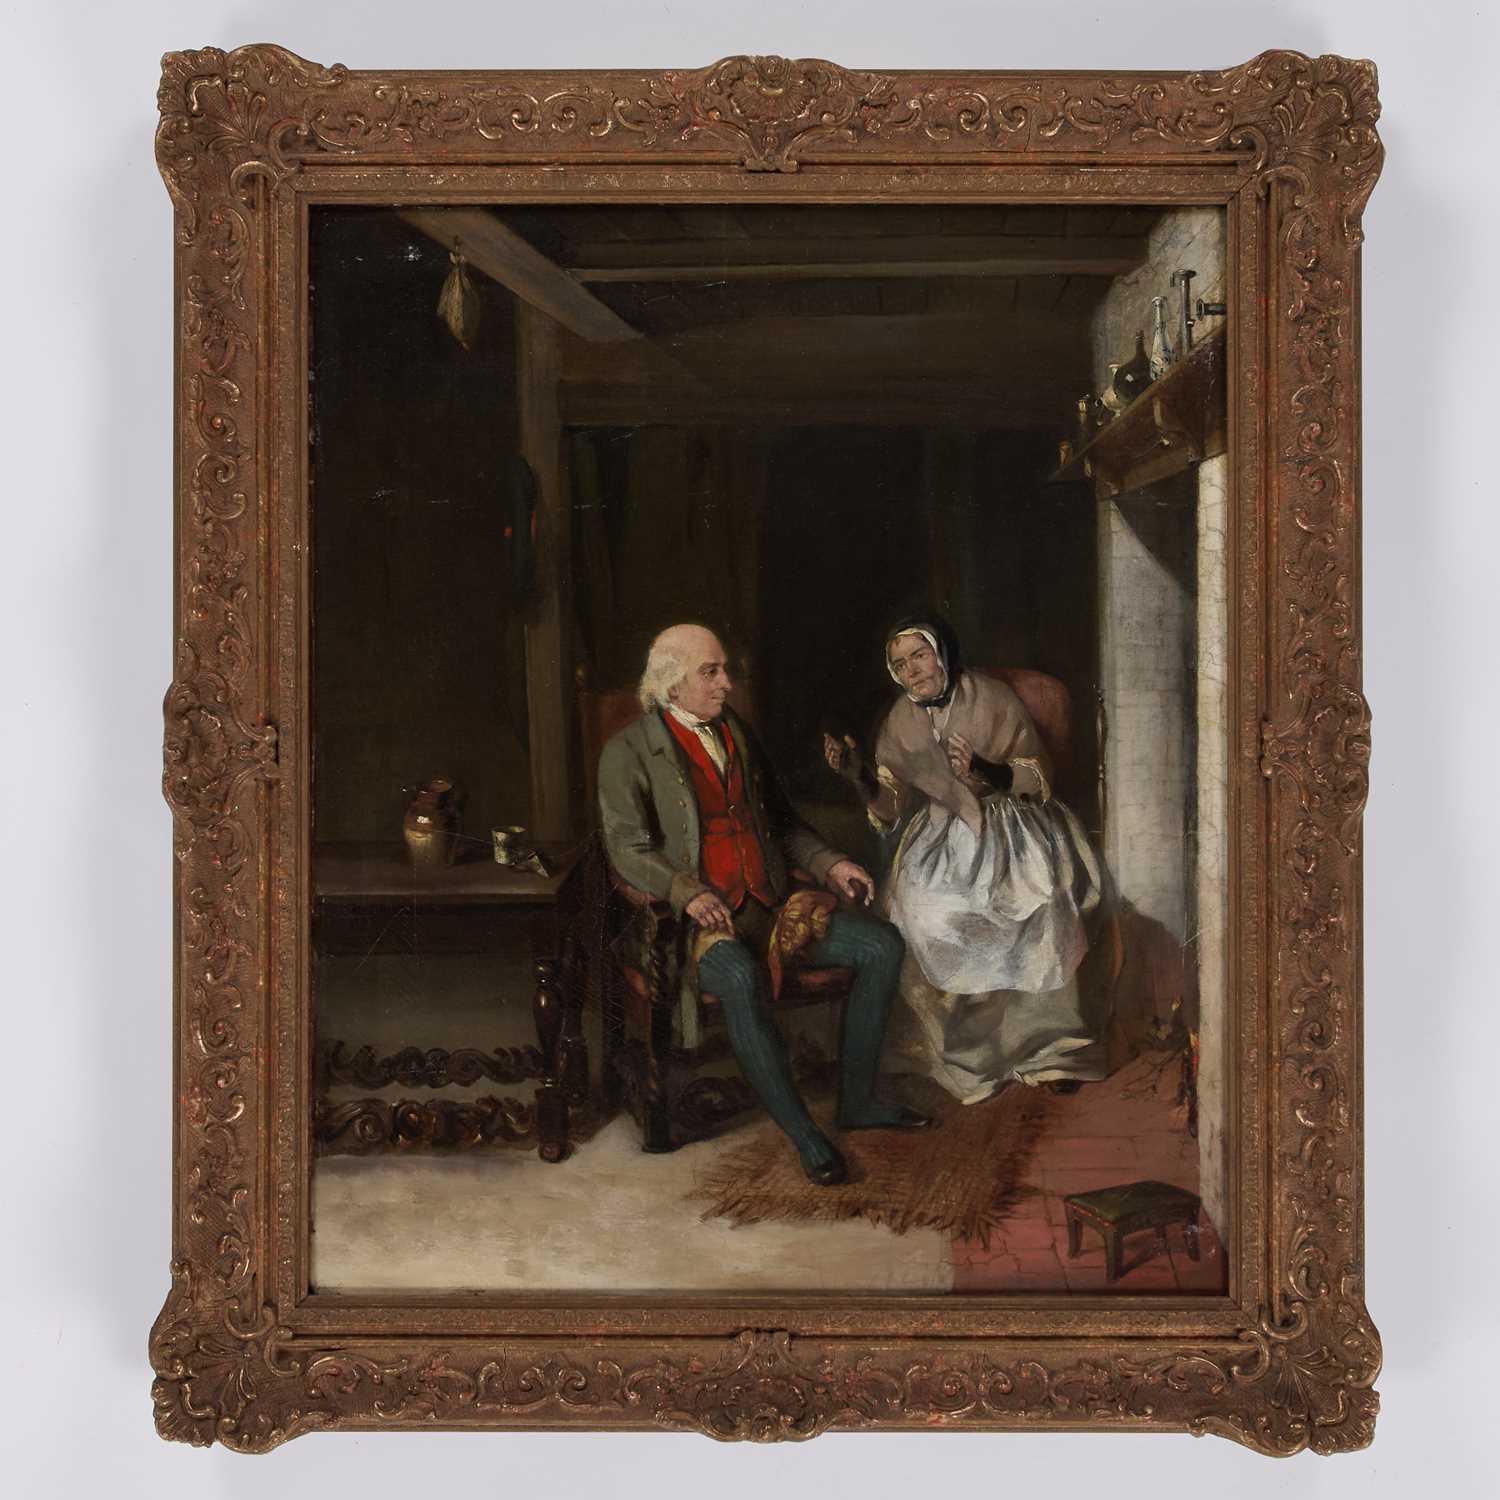 CIRCLE OF SIR DAVID WILKIE (1785-1841) CONVERSATION BY THE FIRE - Image 2 of 3